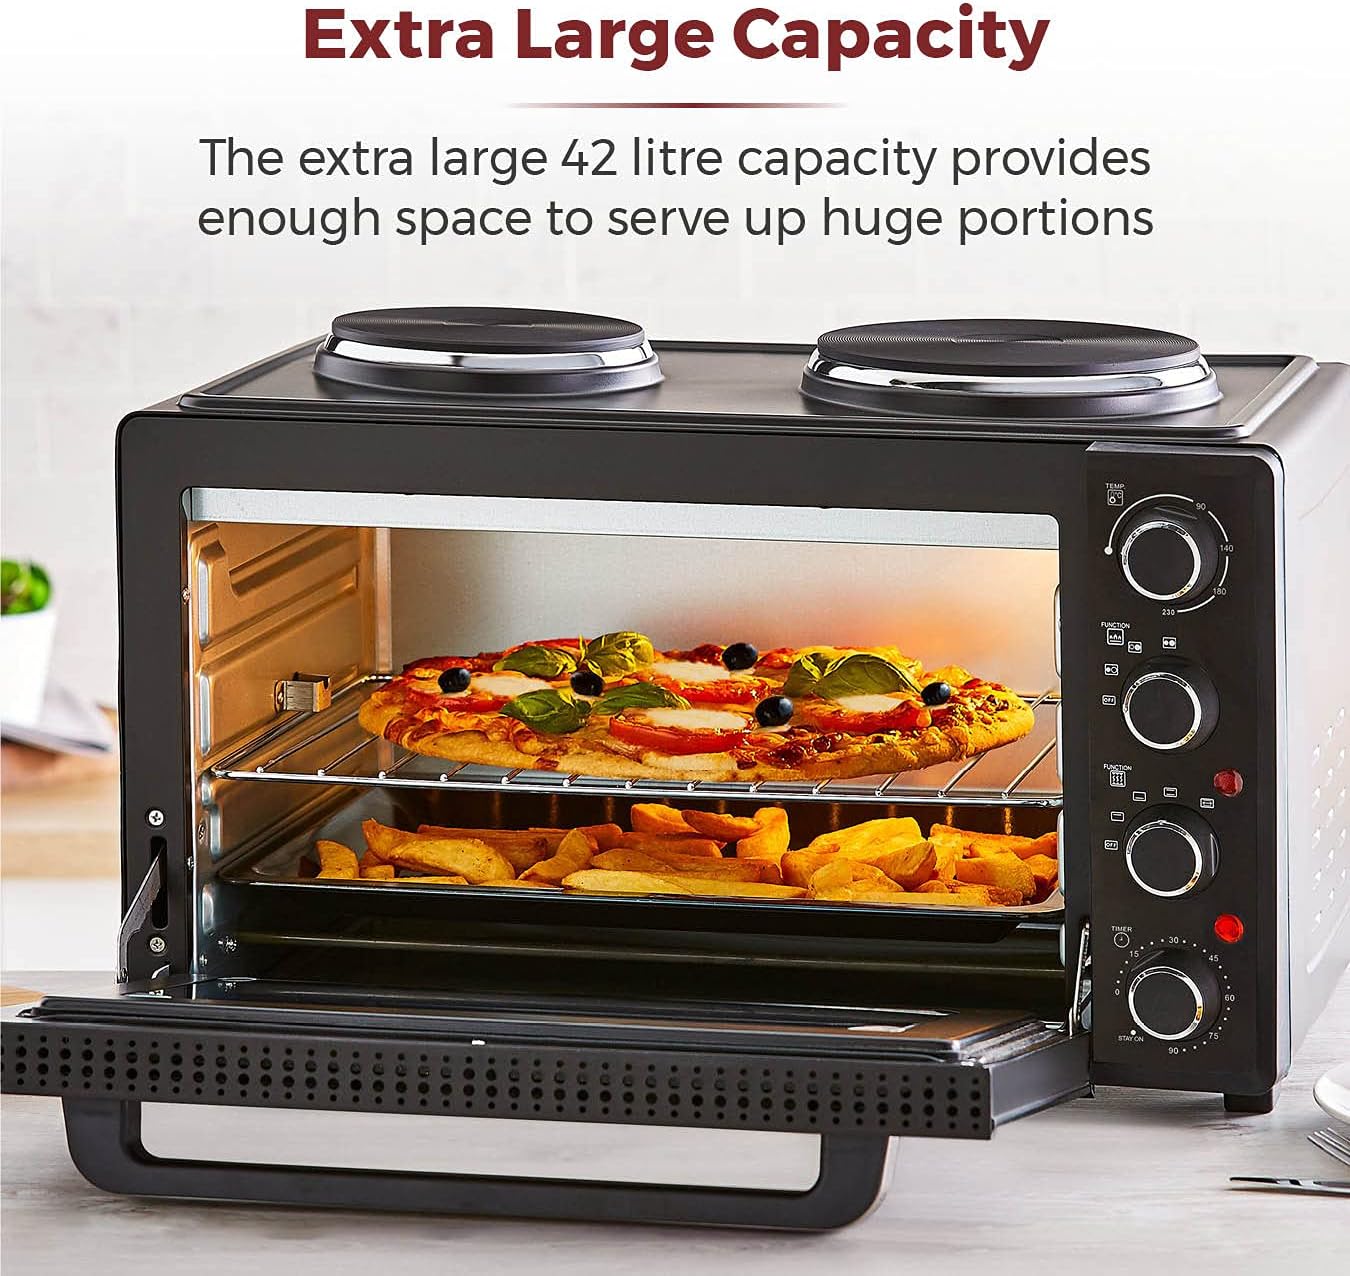 Tower T14045 Mini Oven Review